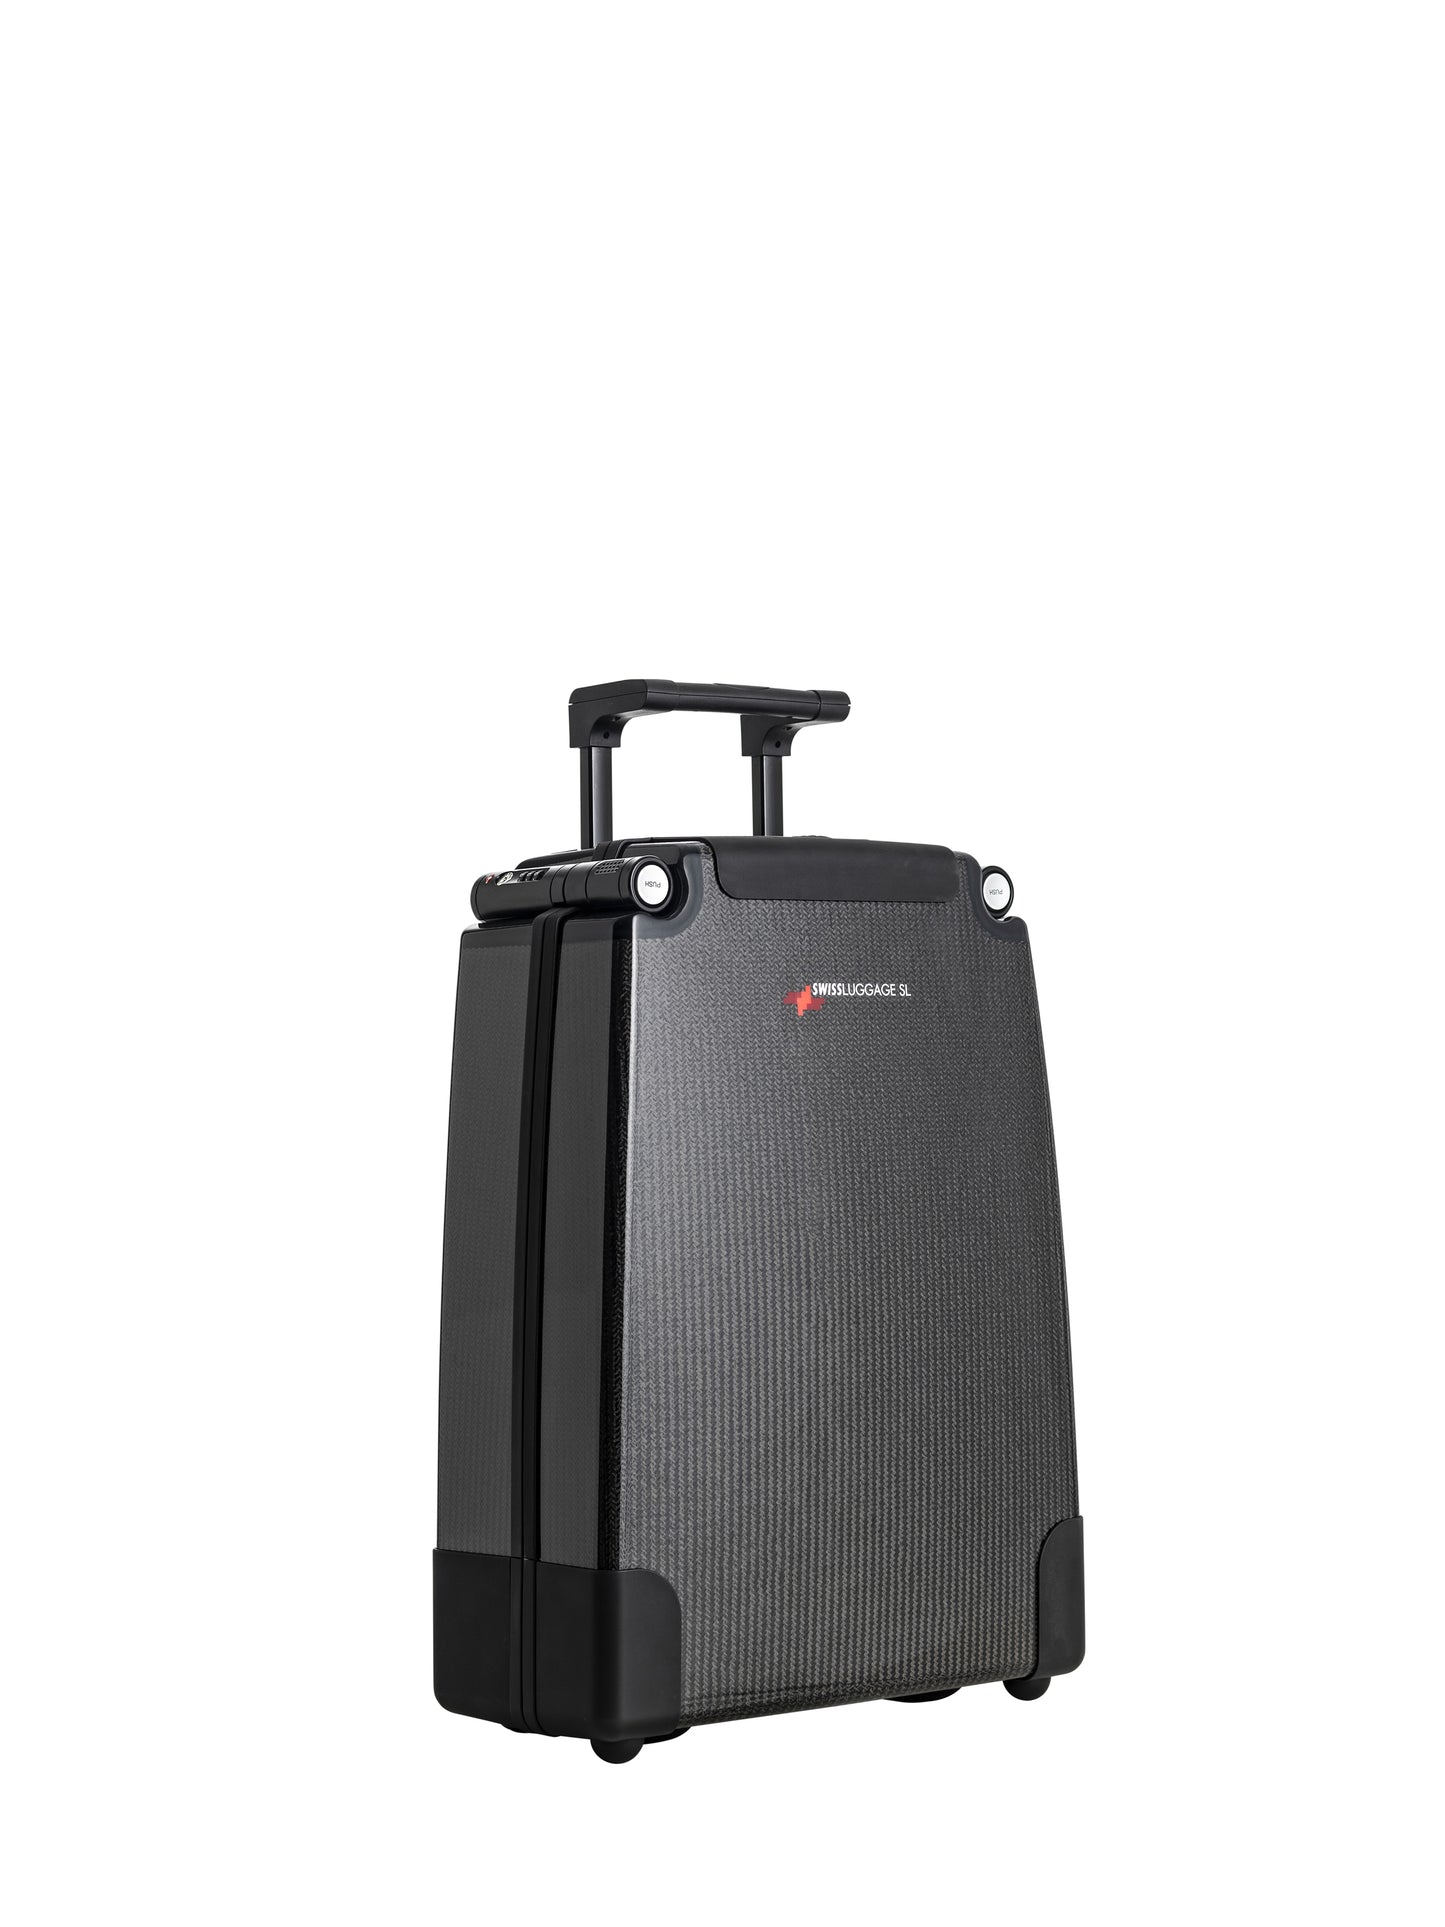 Swiss Luggage SL Grösse S - silber -The Fifity Five